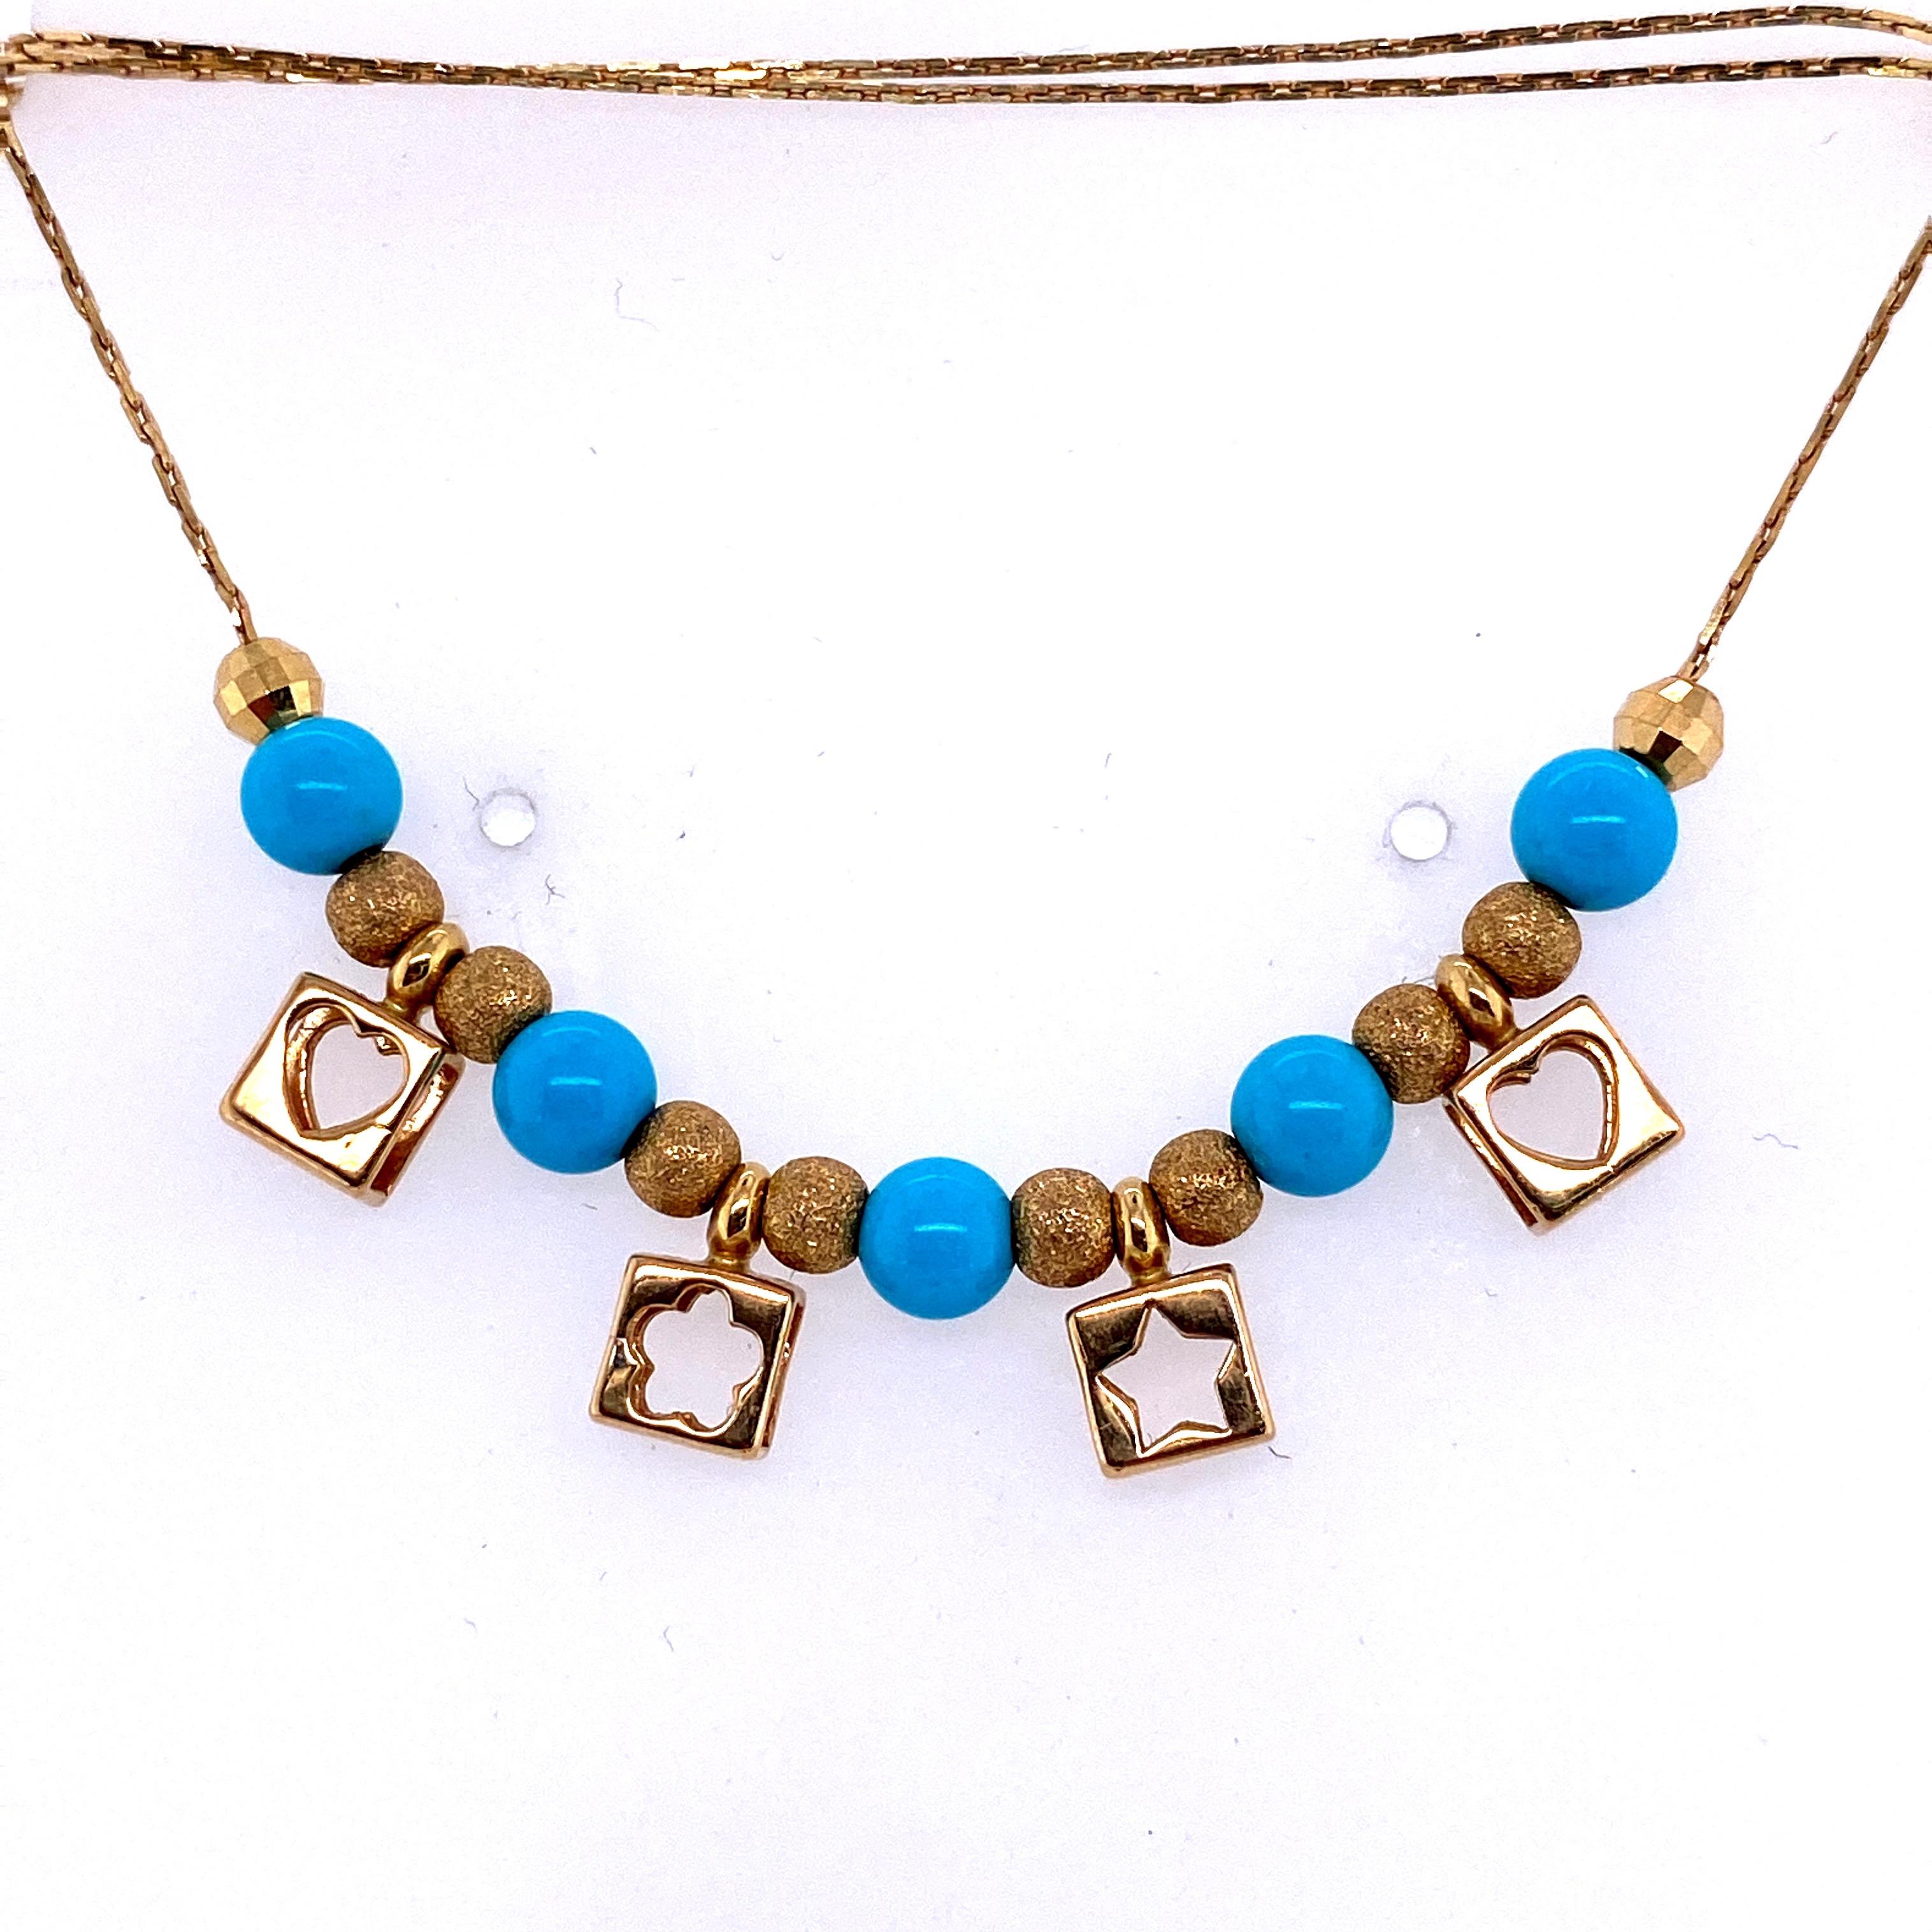 18K Yellow gold necklace featuring hearts & star charms with turquoise and gold beads. 